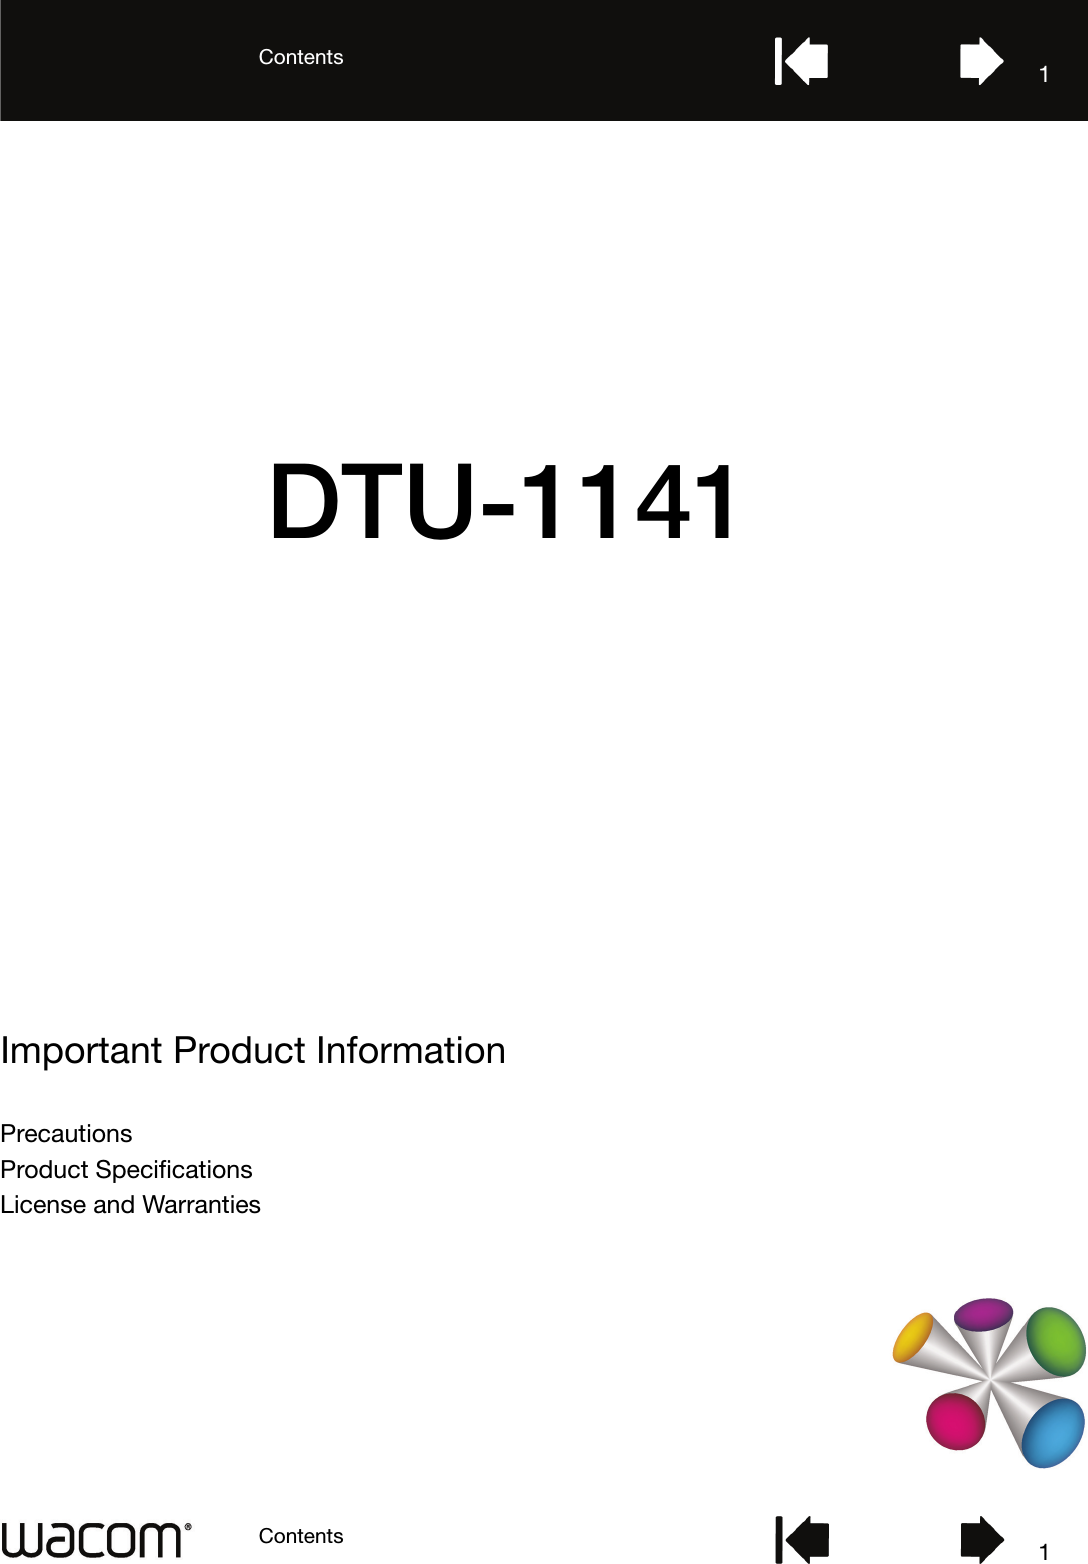 Important Product InformationContentsContents 11PrecautionsProduct Specifications License and WarrantiesDTU-1141